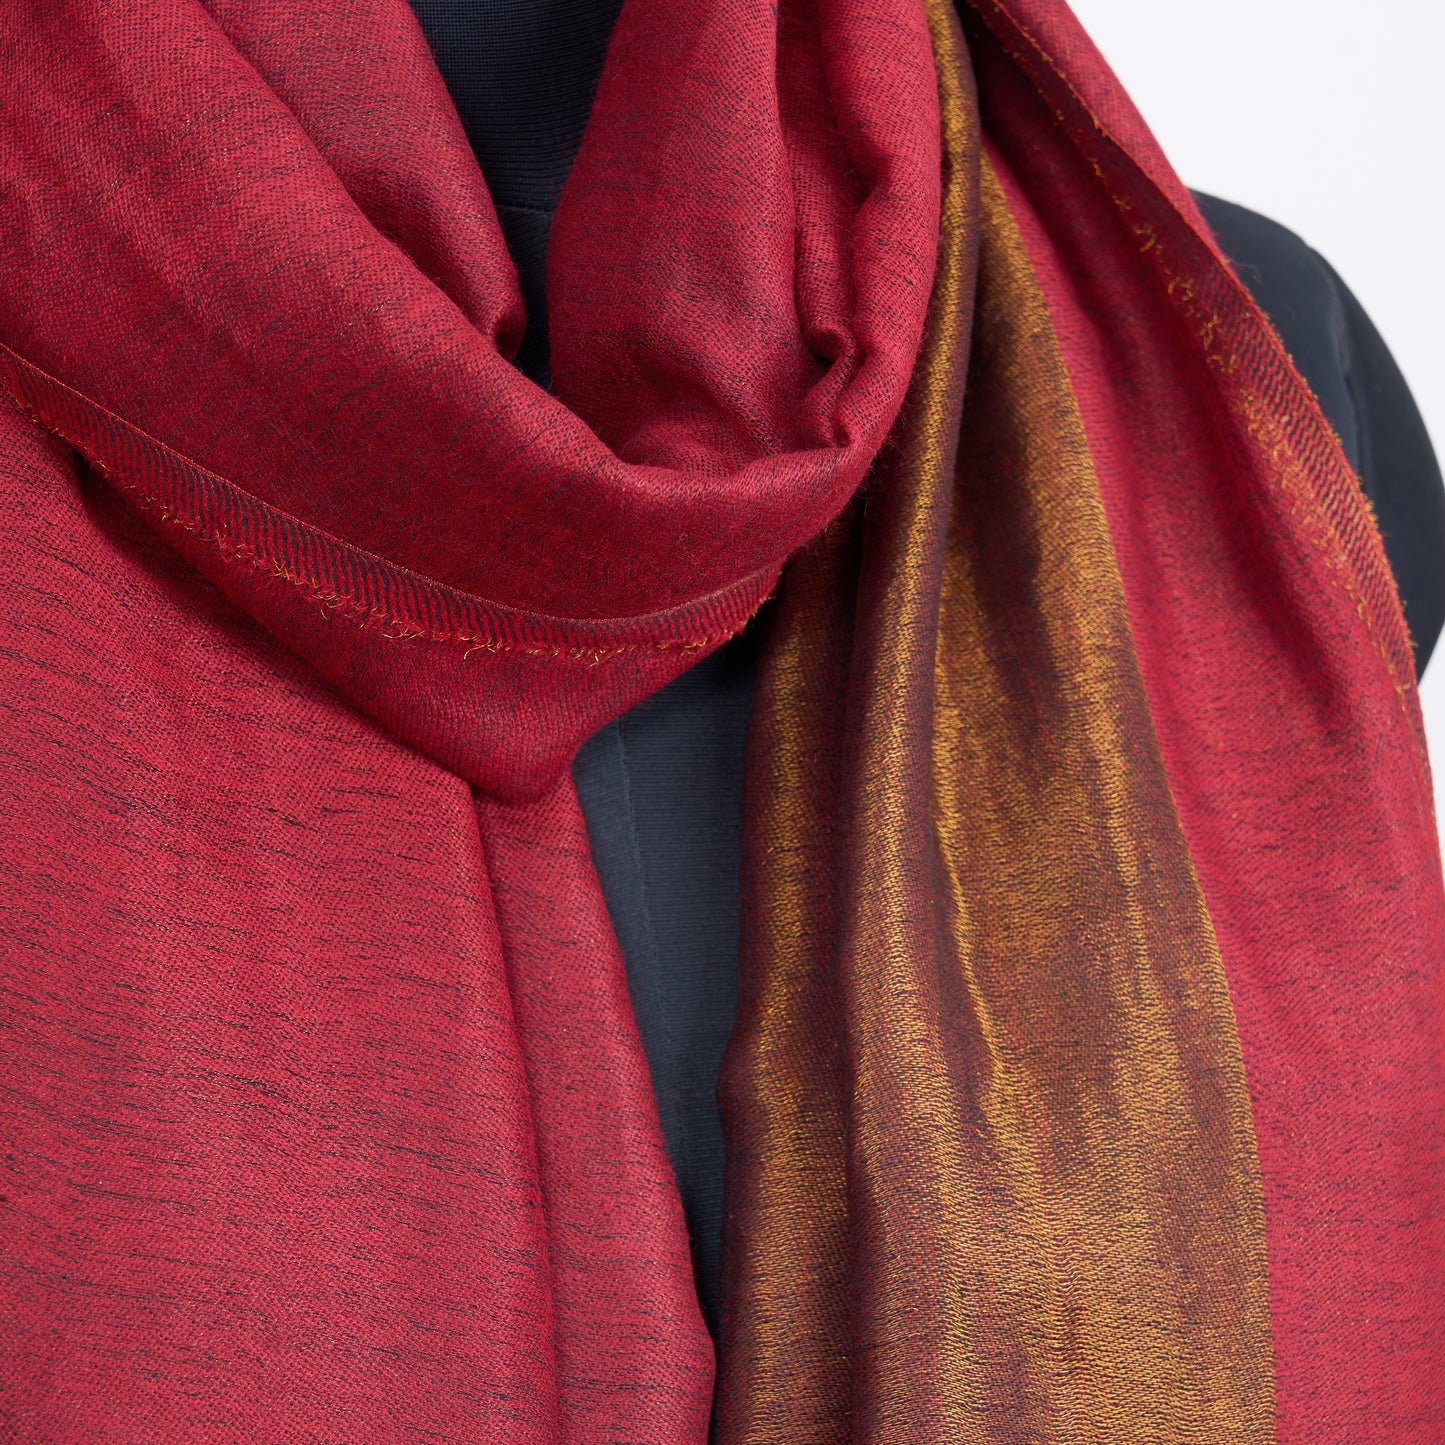 RED fine wool with gold zari scarf, reversible autumn winter stole